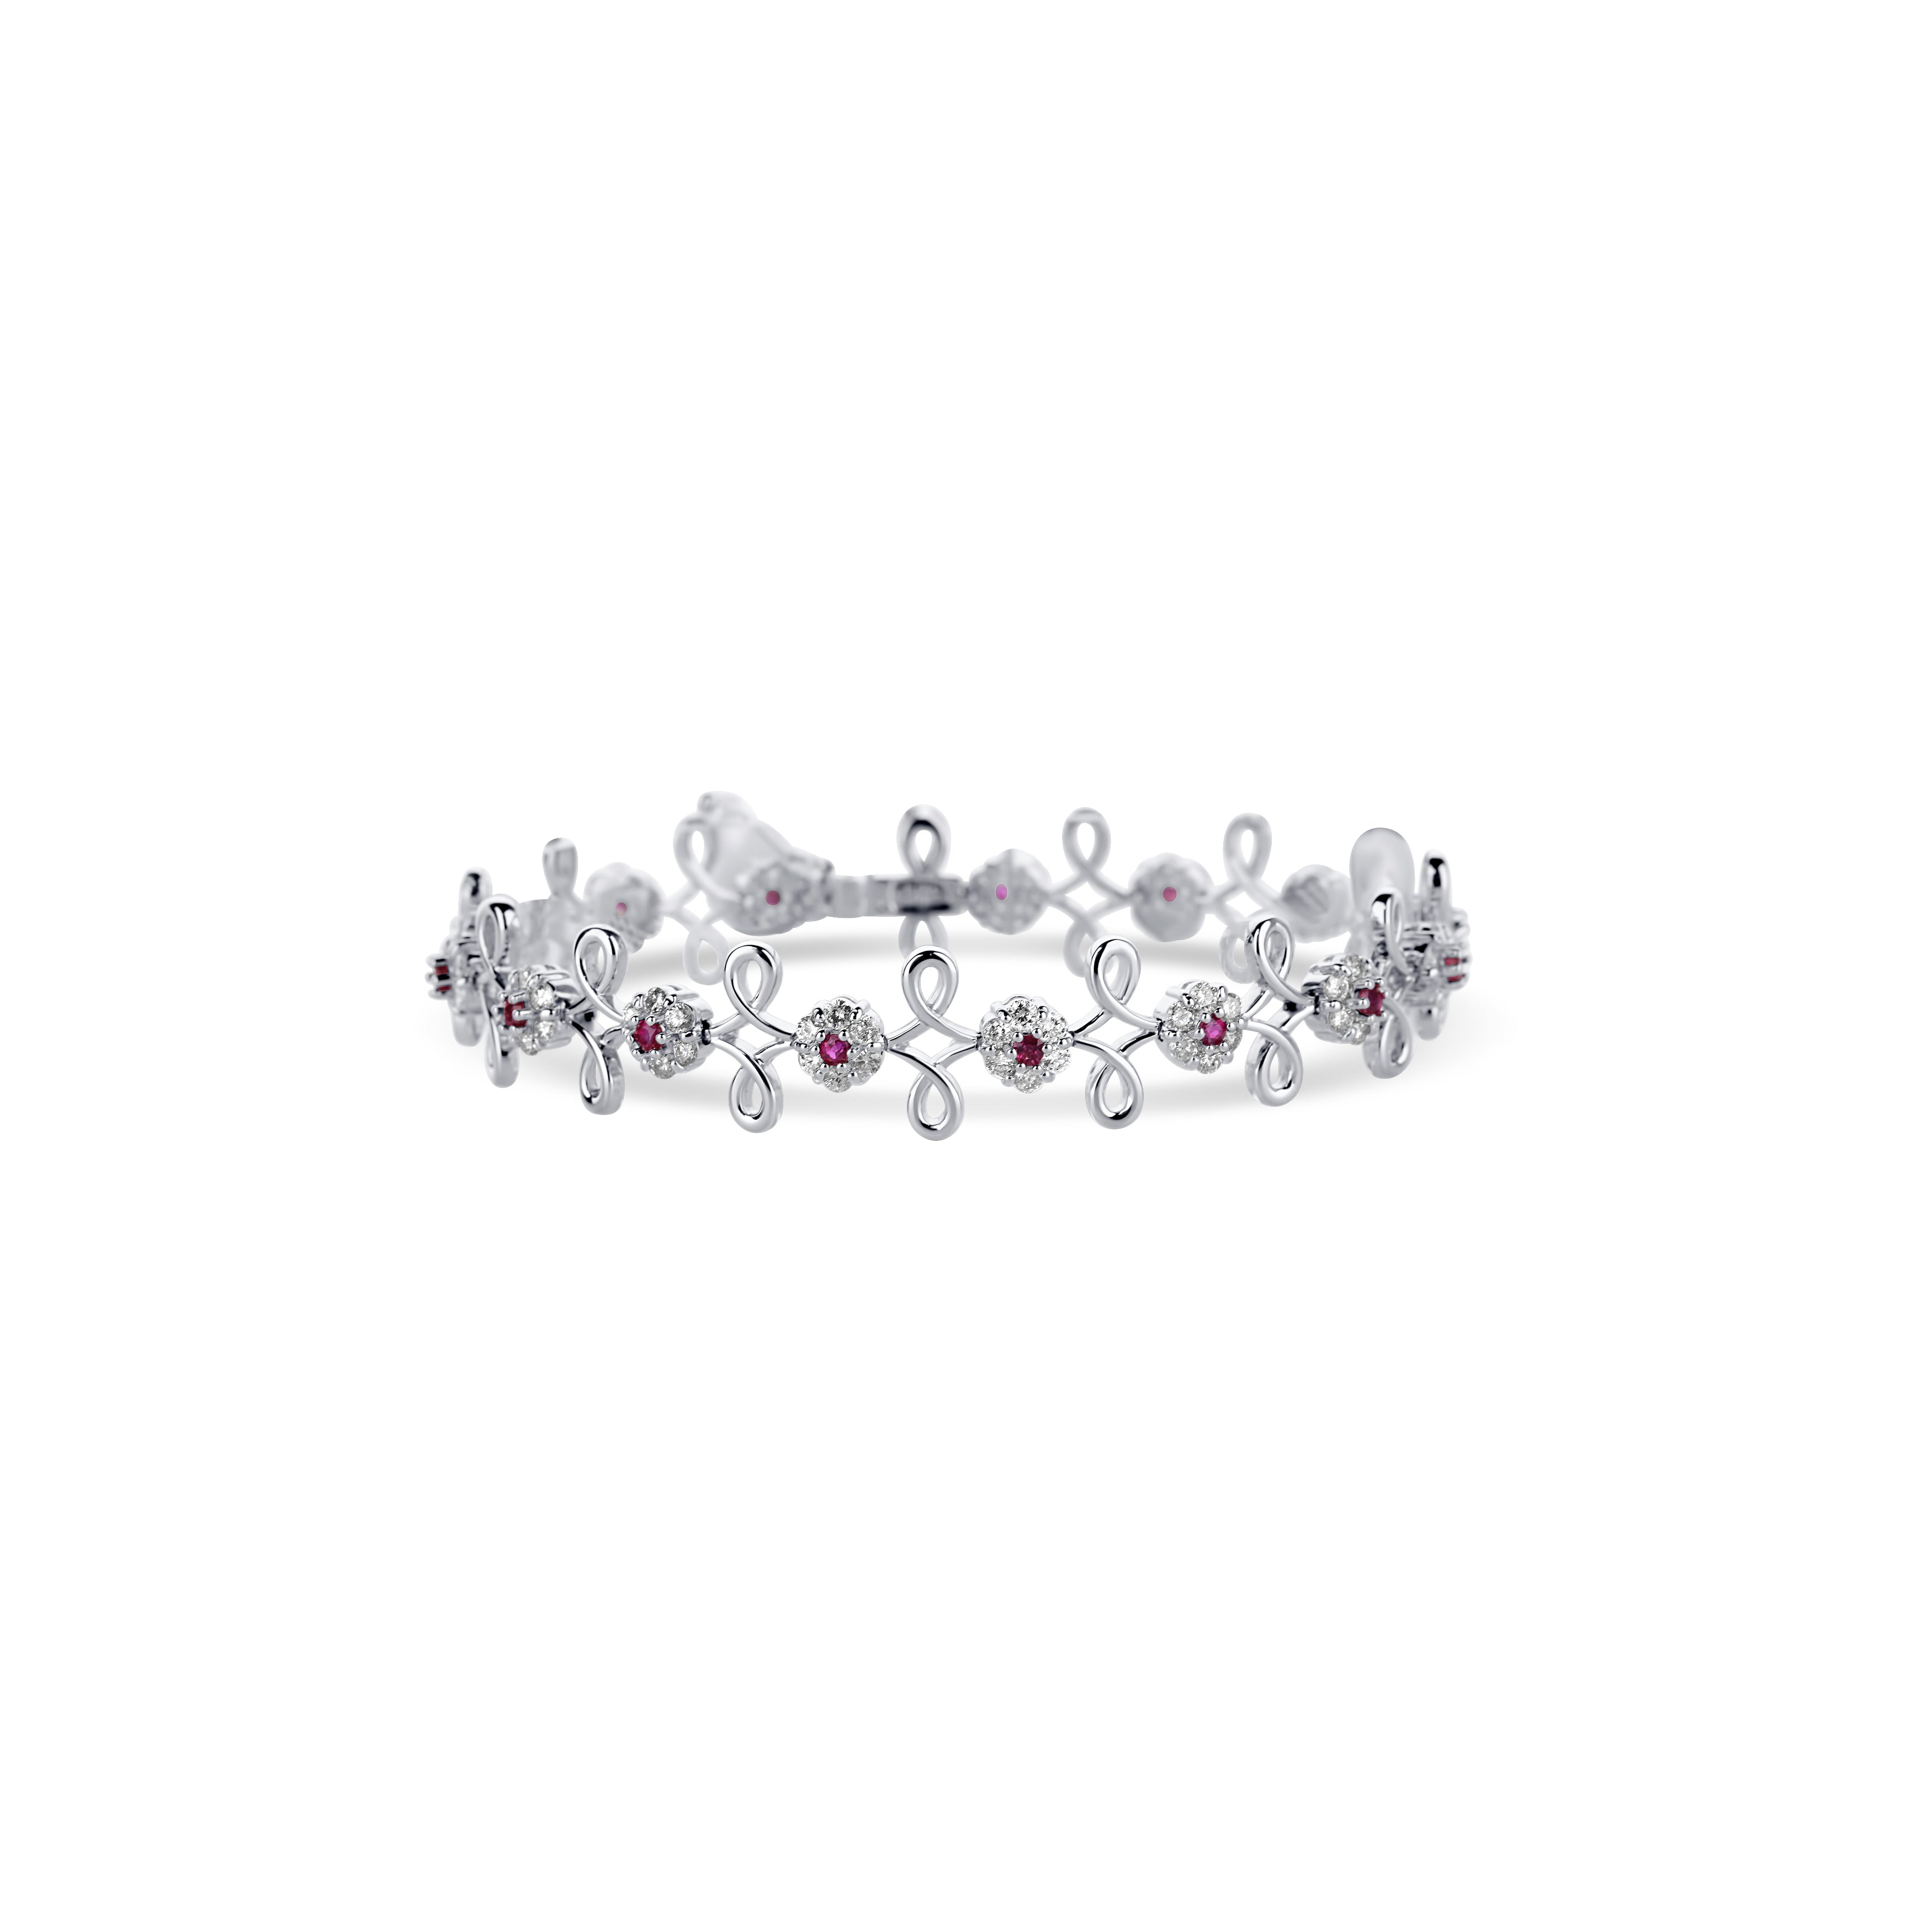 18K White Gold Ruby And Diamond Flowers Bracelet With Alternating Scrolling Bracelet With 15 Rubies